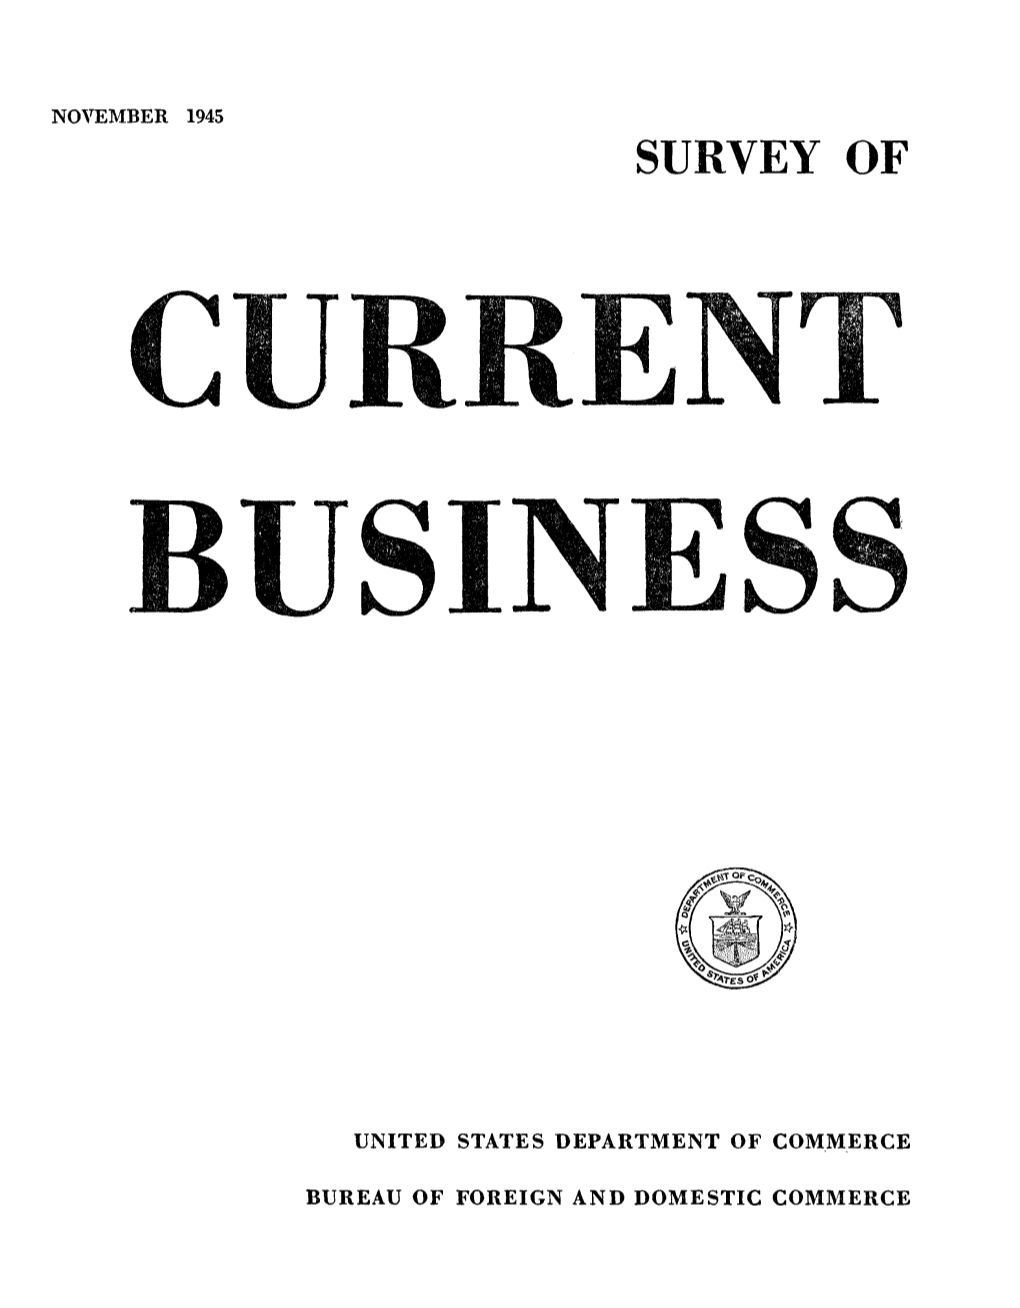 SURVEY of CURRENT BUSINESS November 1945 Deliveries Were Still Considerably in the Twenties